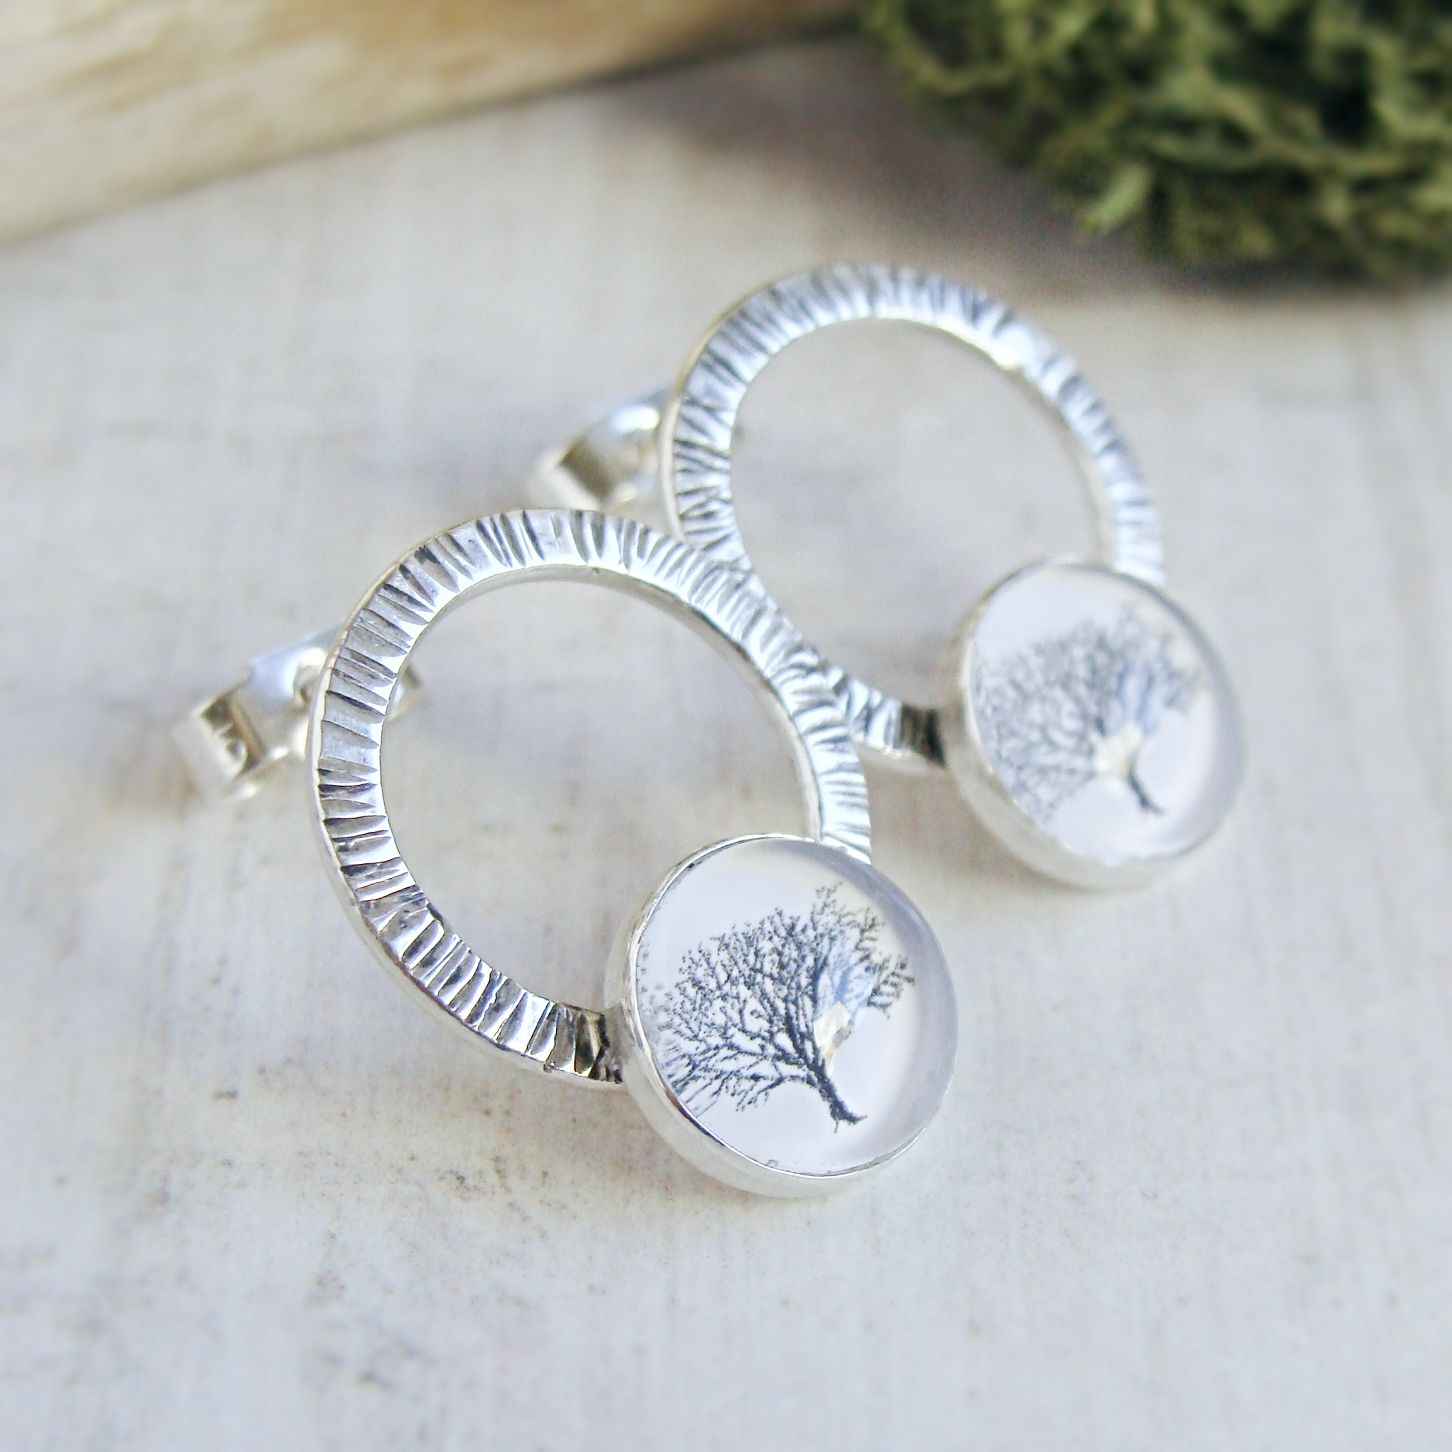 Eco recycled silver circle stud post earrings with oak tree illustration charms